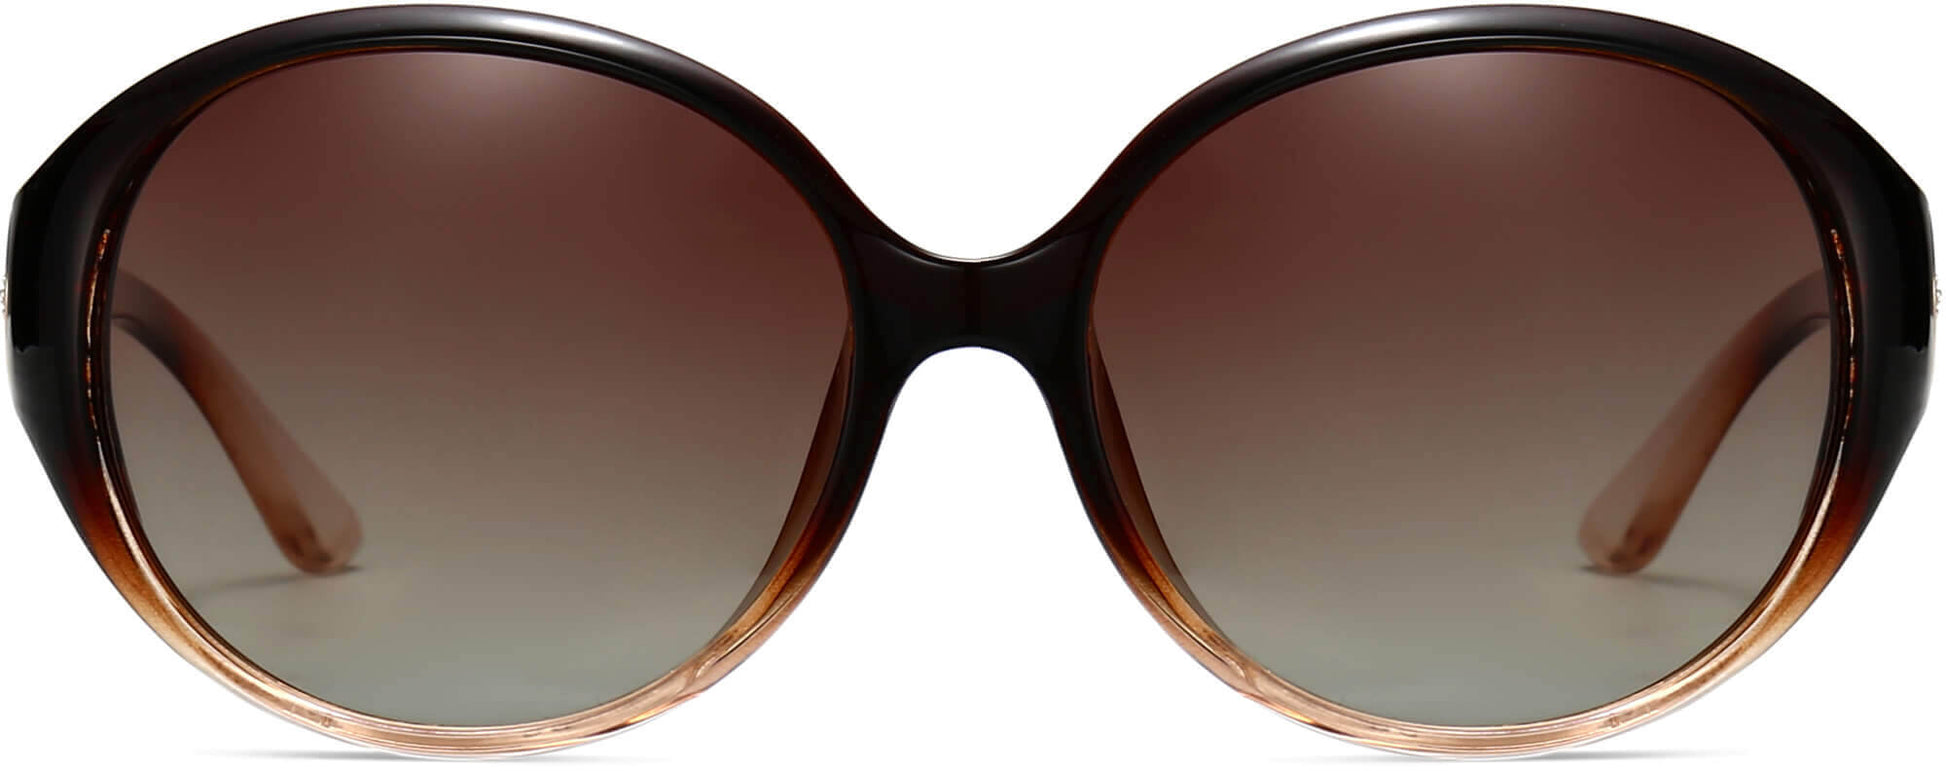 Brianna Brown Plastic Sunglasses from ANRRI, front view